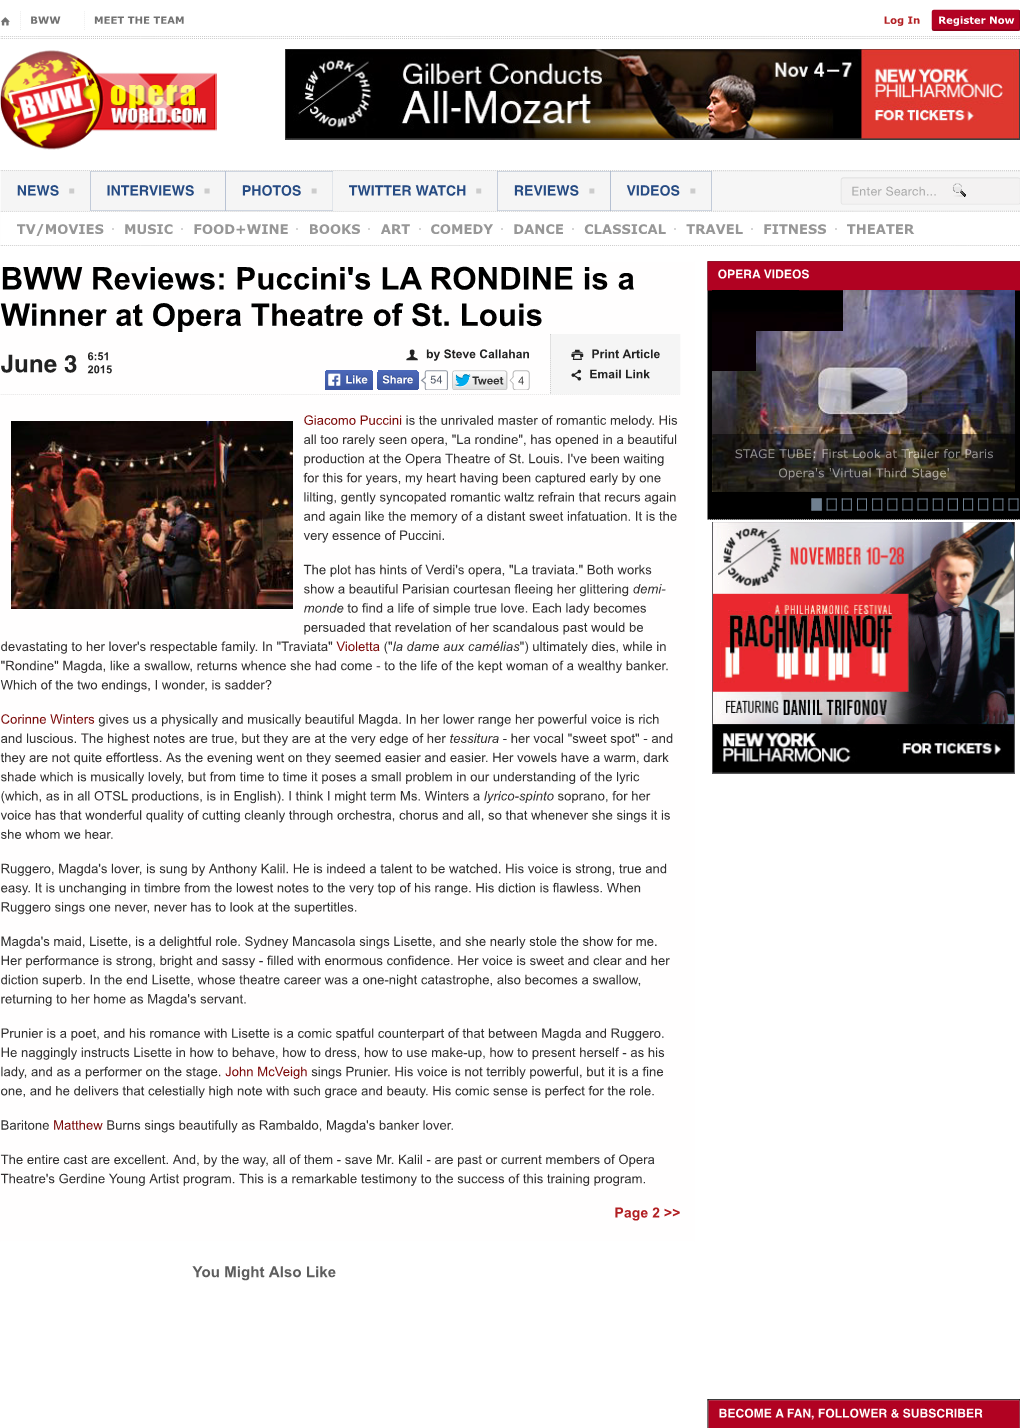 BWW Reviews: Puccini's LA RONDINE Is a Winner at Opera